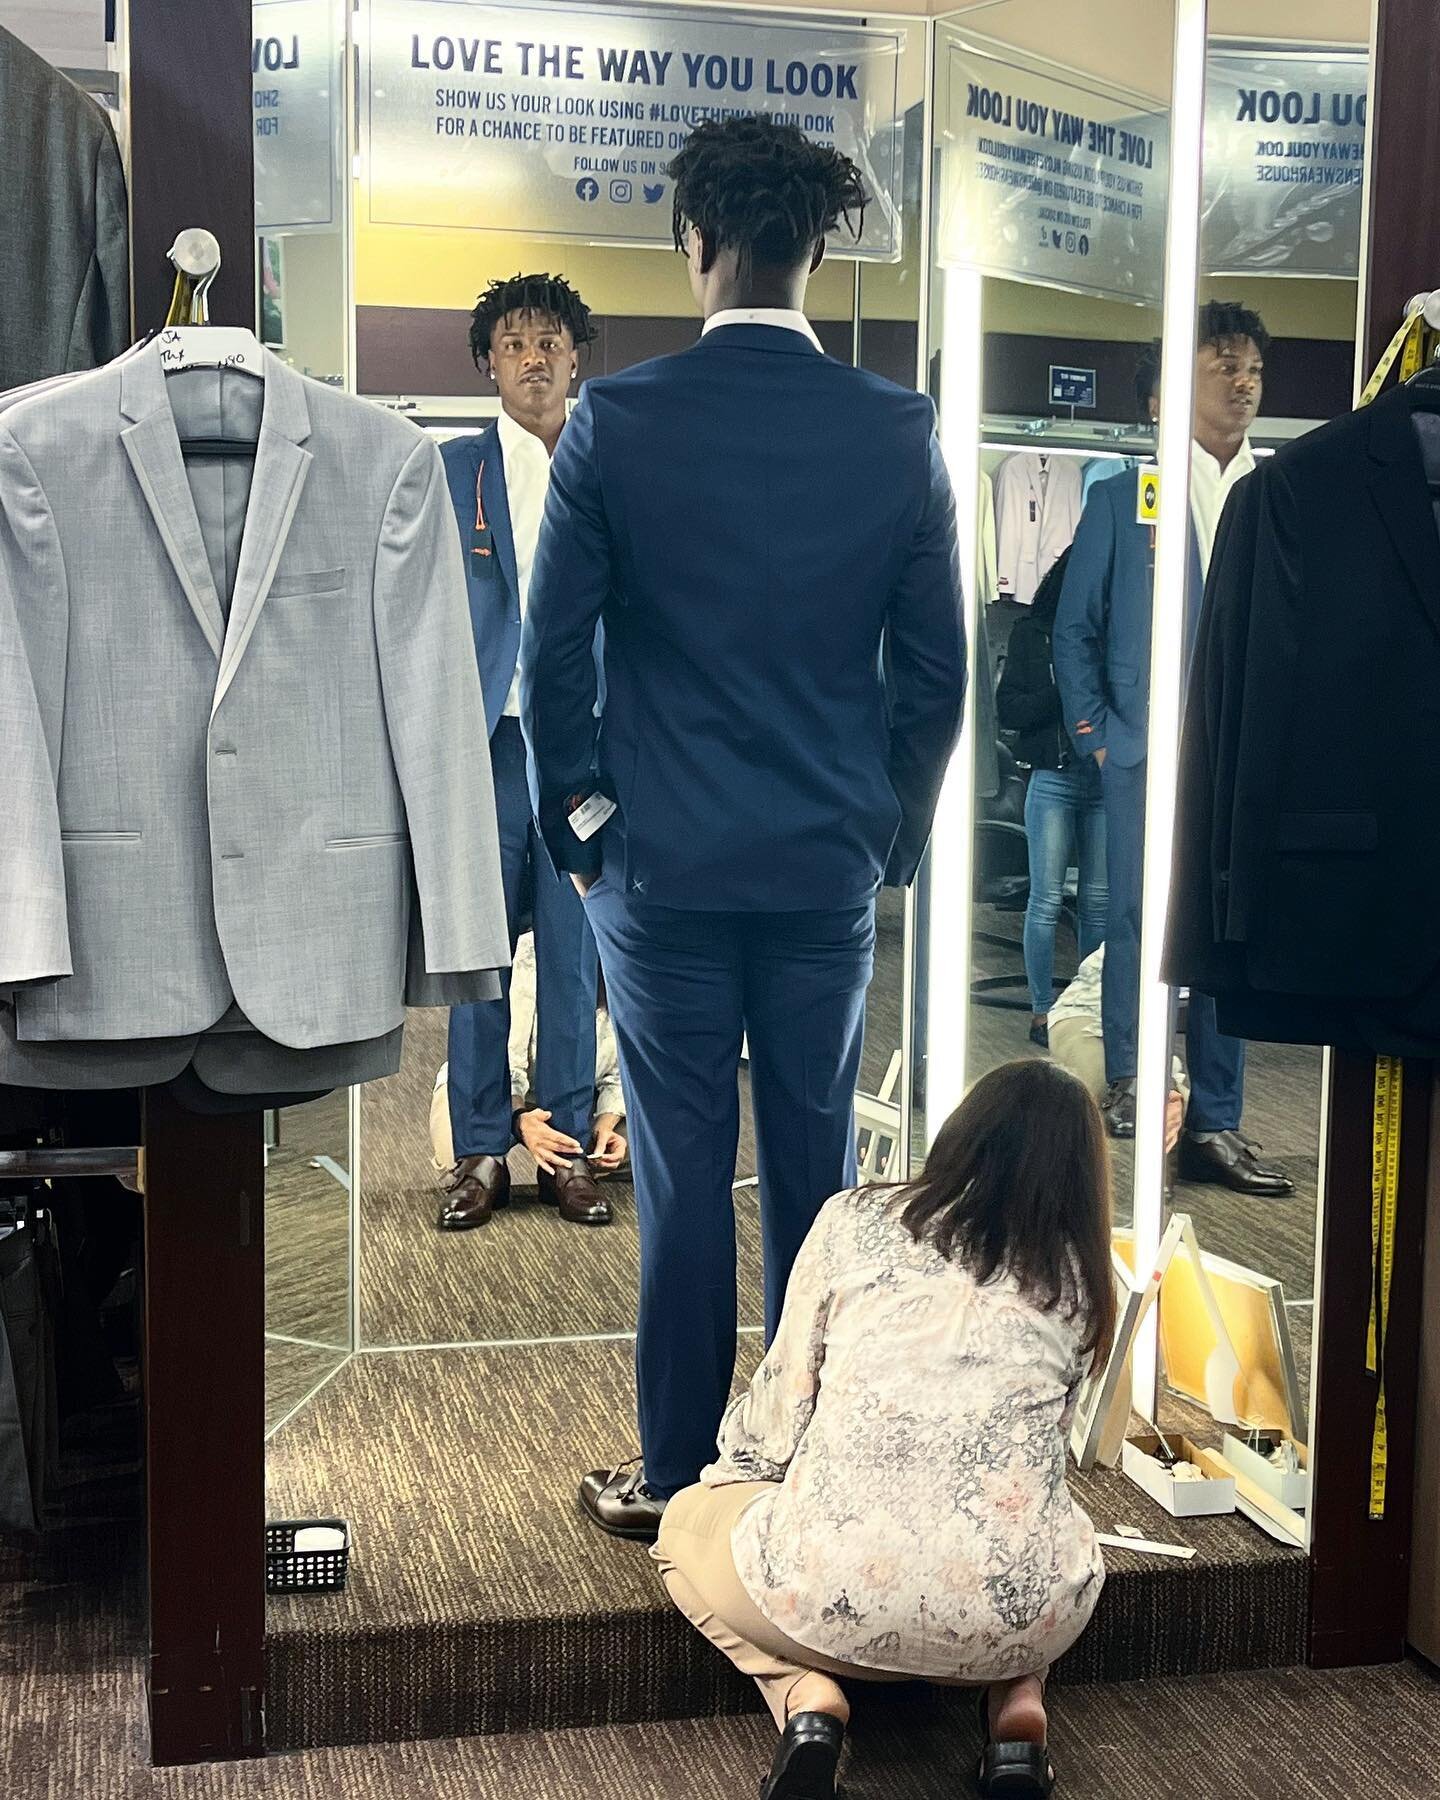 We love being a part of &ldquo;firsts&rdquo; in a youth&rsquo;s life. Staff took Andre to buy his first suit at Men&rsquo;s Wearhouse and he is looking GOOD! 💯

Andre is working on starting his own business and plans to wear his suit to all his impo